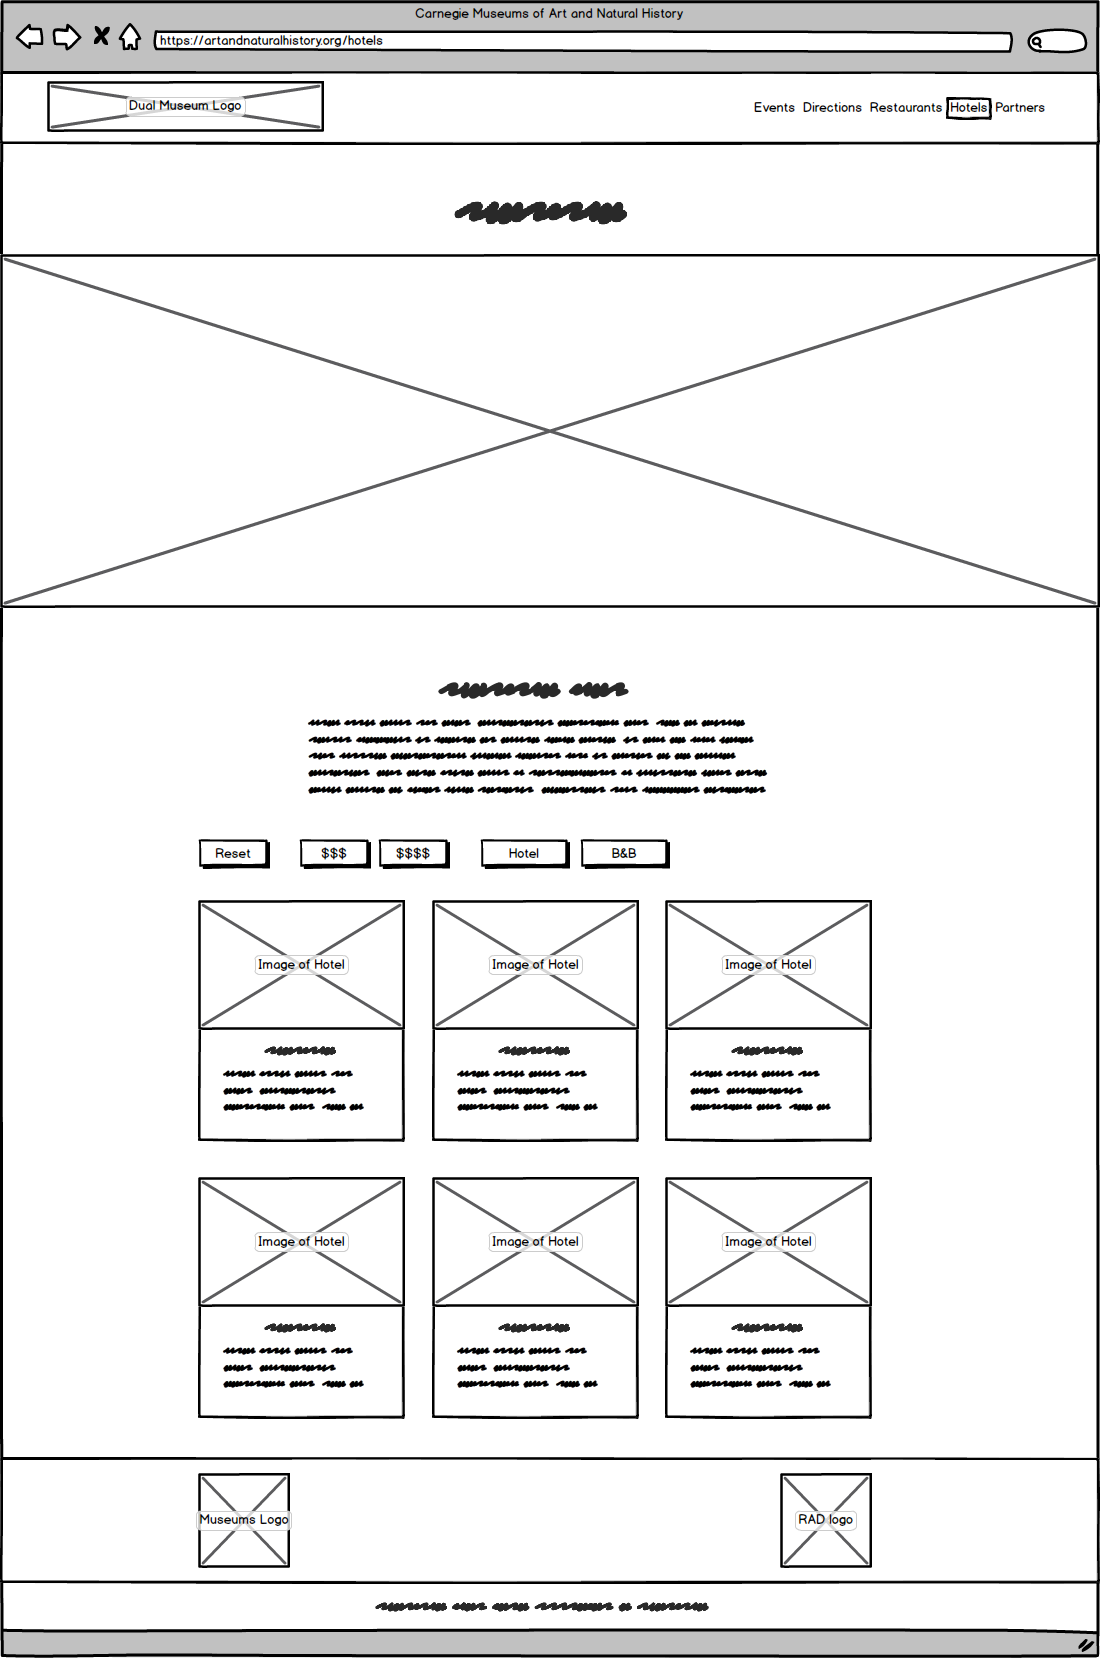 Hotels wireframe